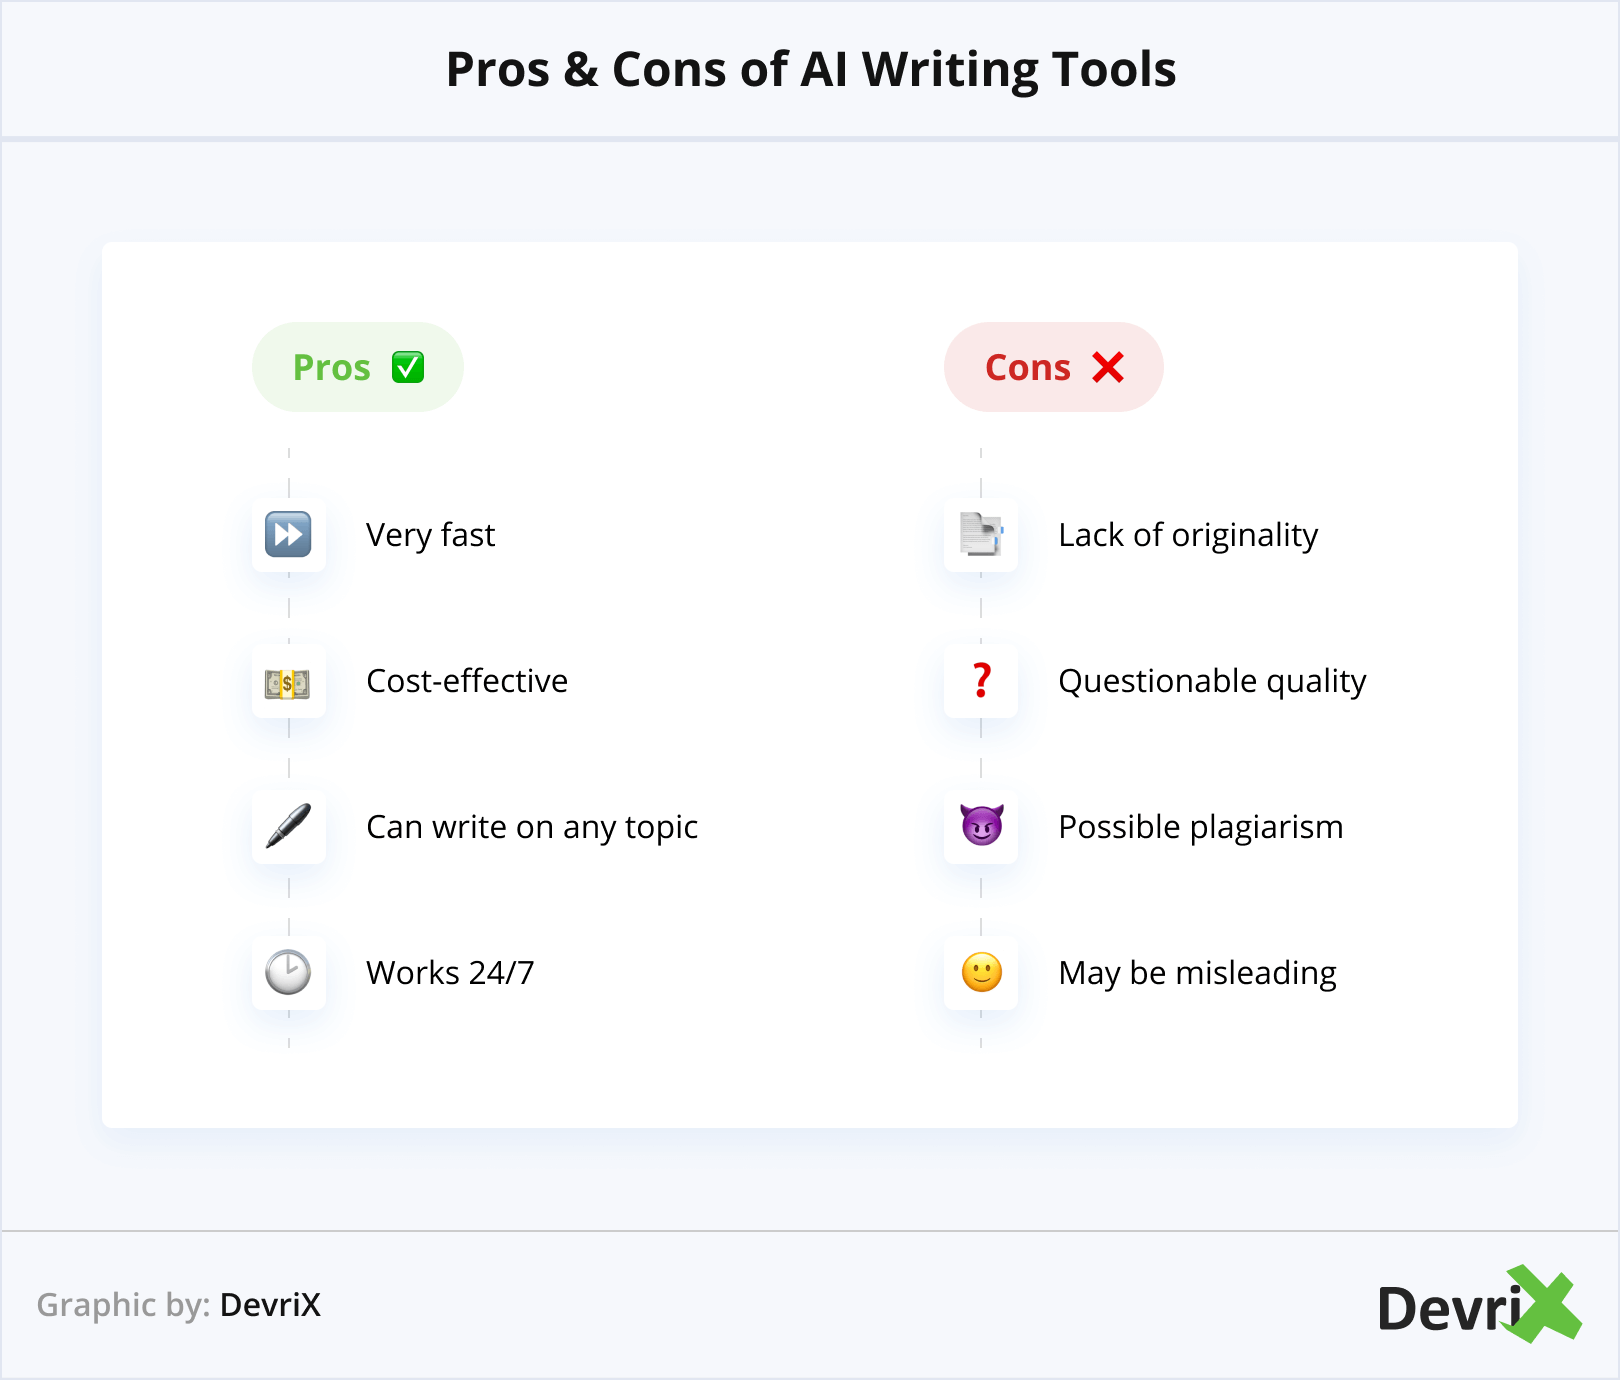 Pros & Cons of AI Writing Tools